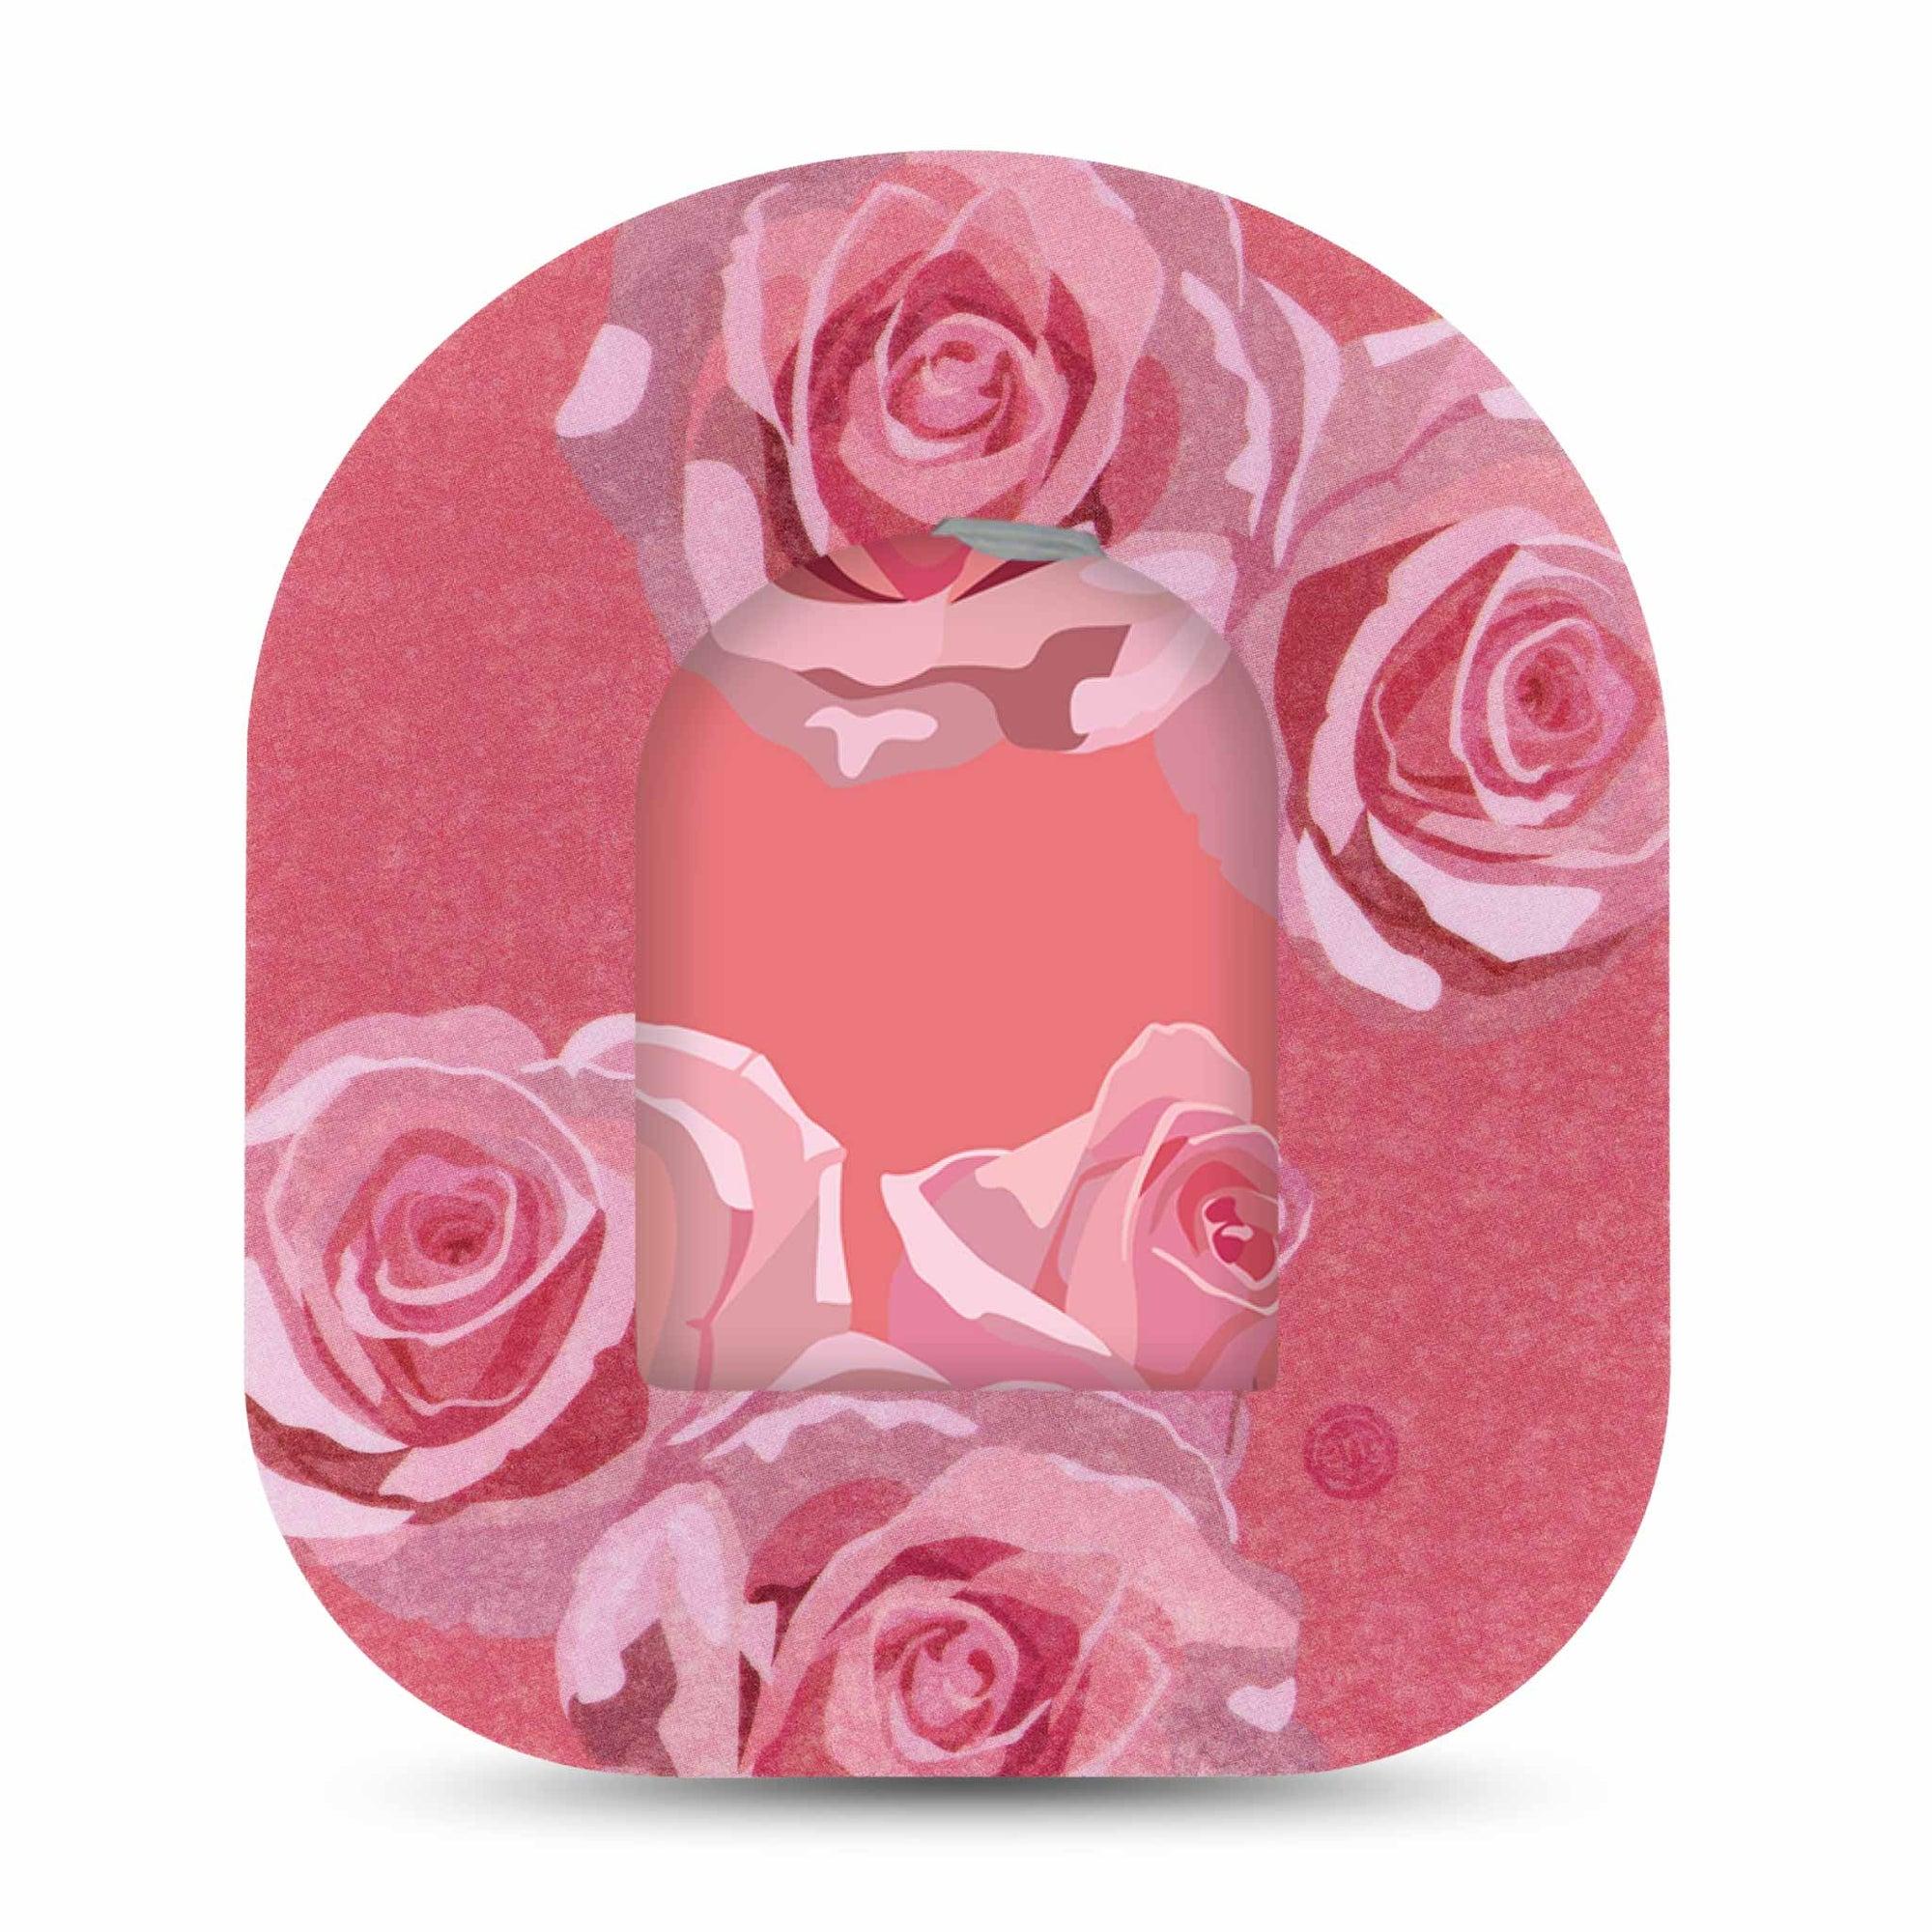 ExpressionMed Blush Rose Pod Center Sticker with Matching Pod Tape Single Sticker Only Pinky Rose Bouquet Theme Vinyl Pump Device Design